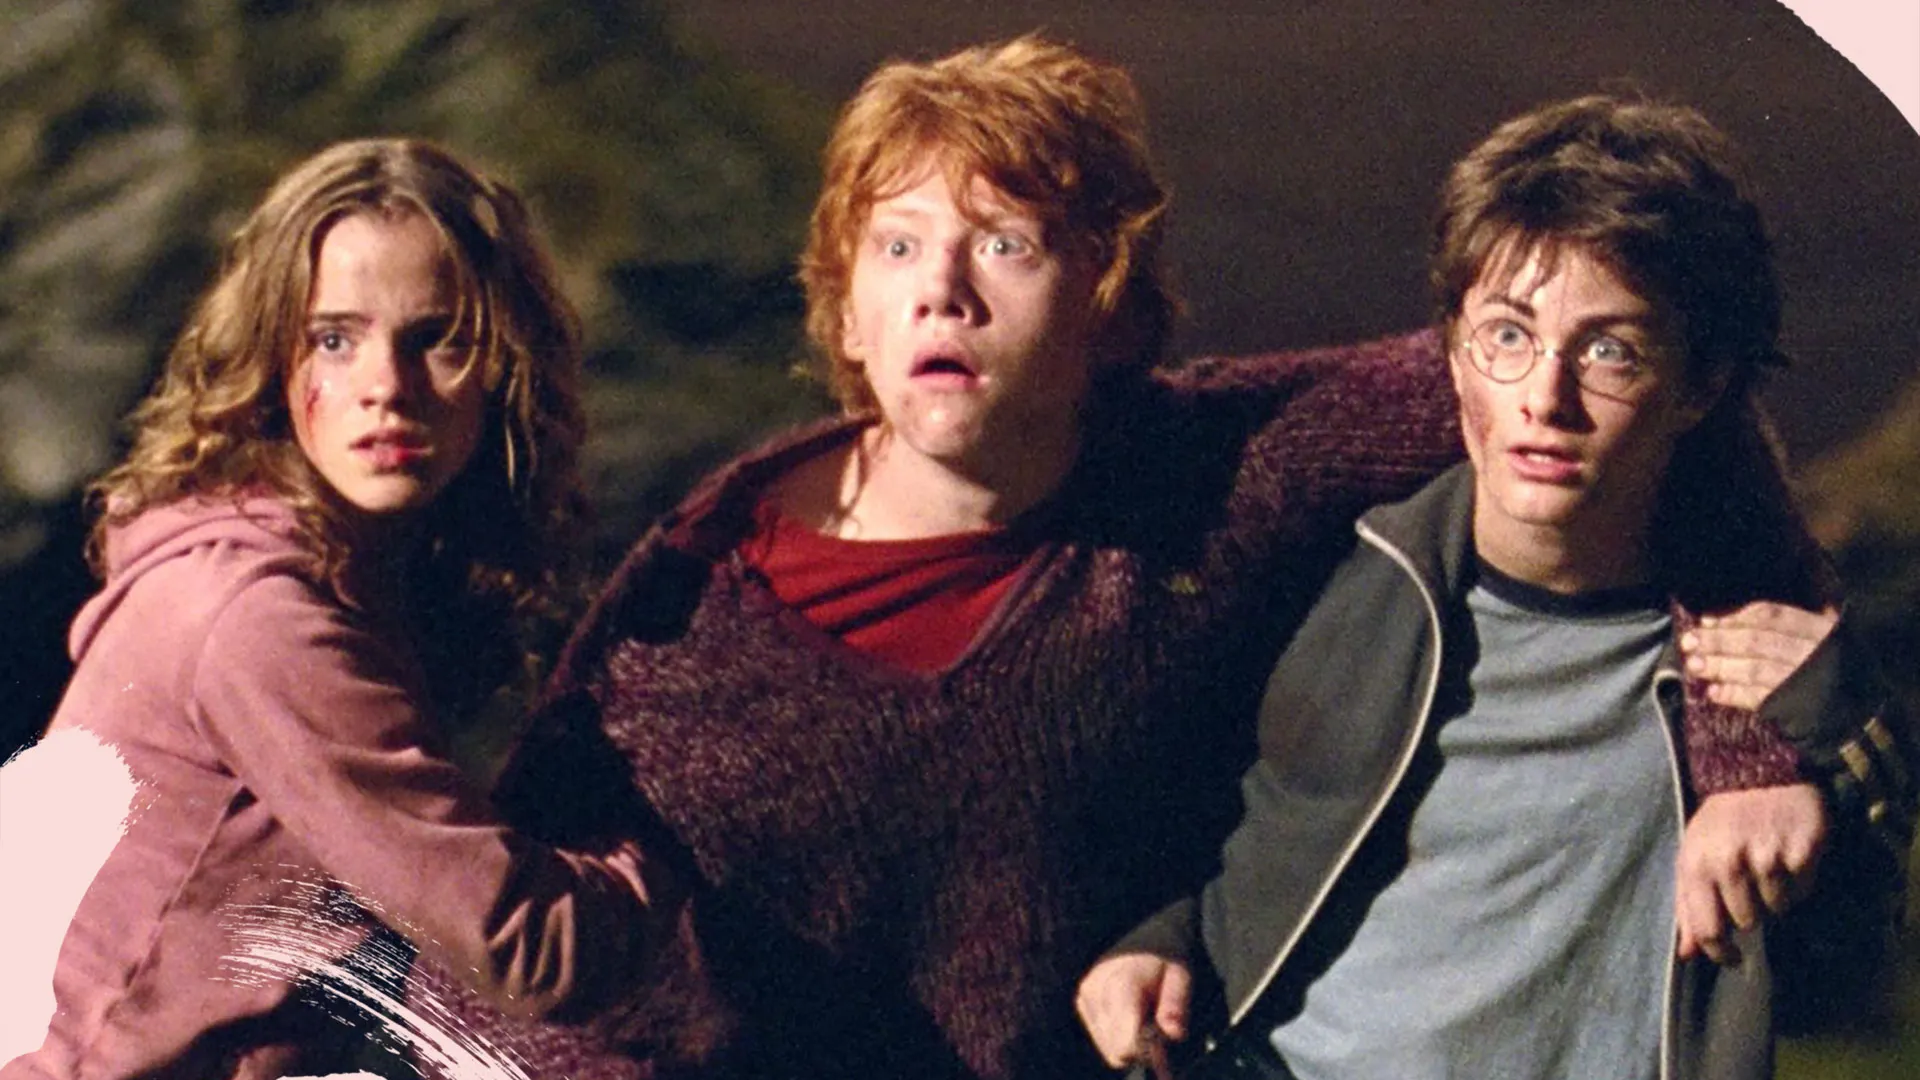 Harry Potter' TV Series At HBO Max: JK Rowling In Talks To Produce